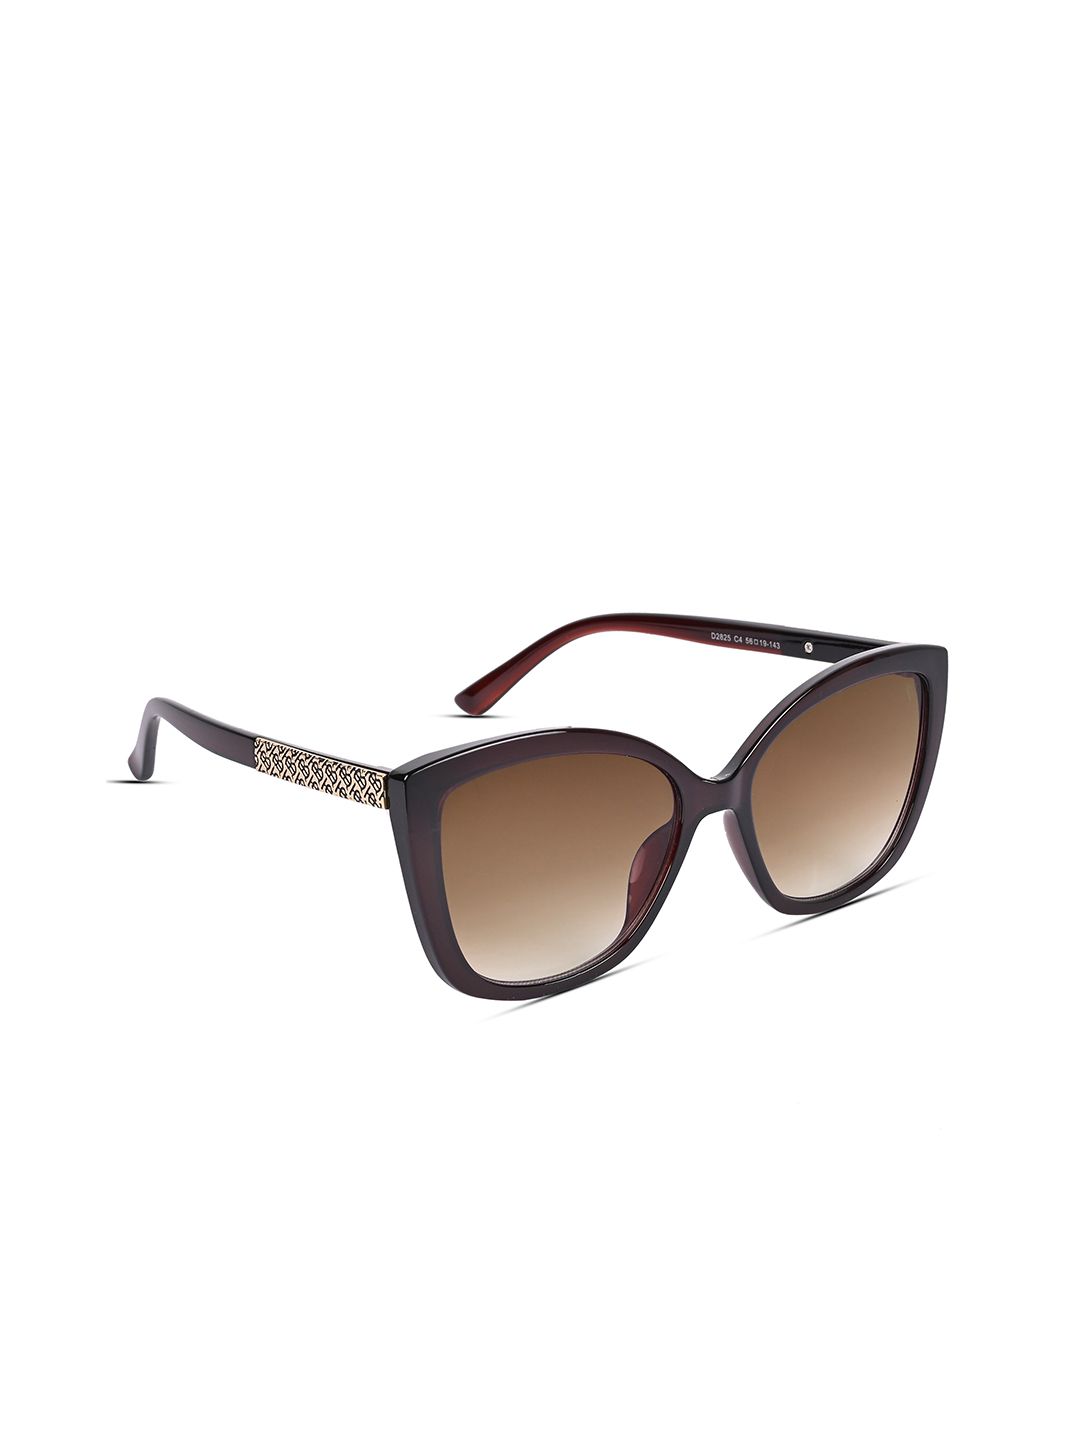 Voyage Unisex Brown Lens & Brown Cateye Sunglasses with UV Protected Lens Price in India